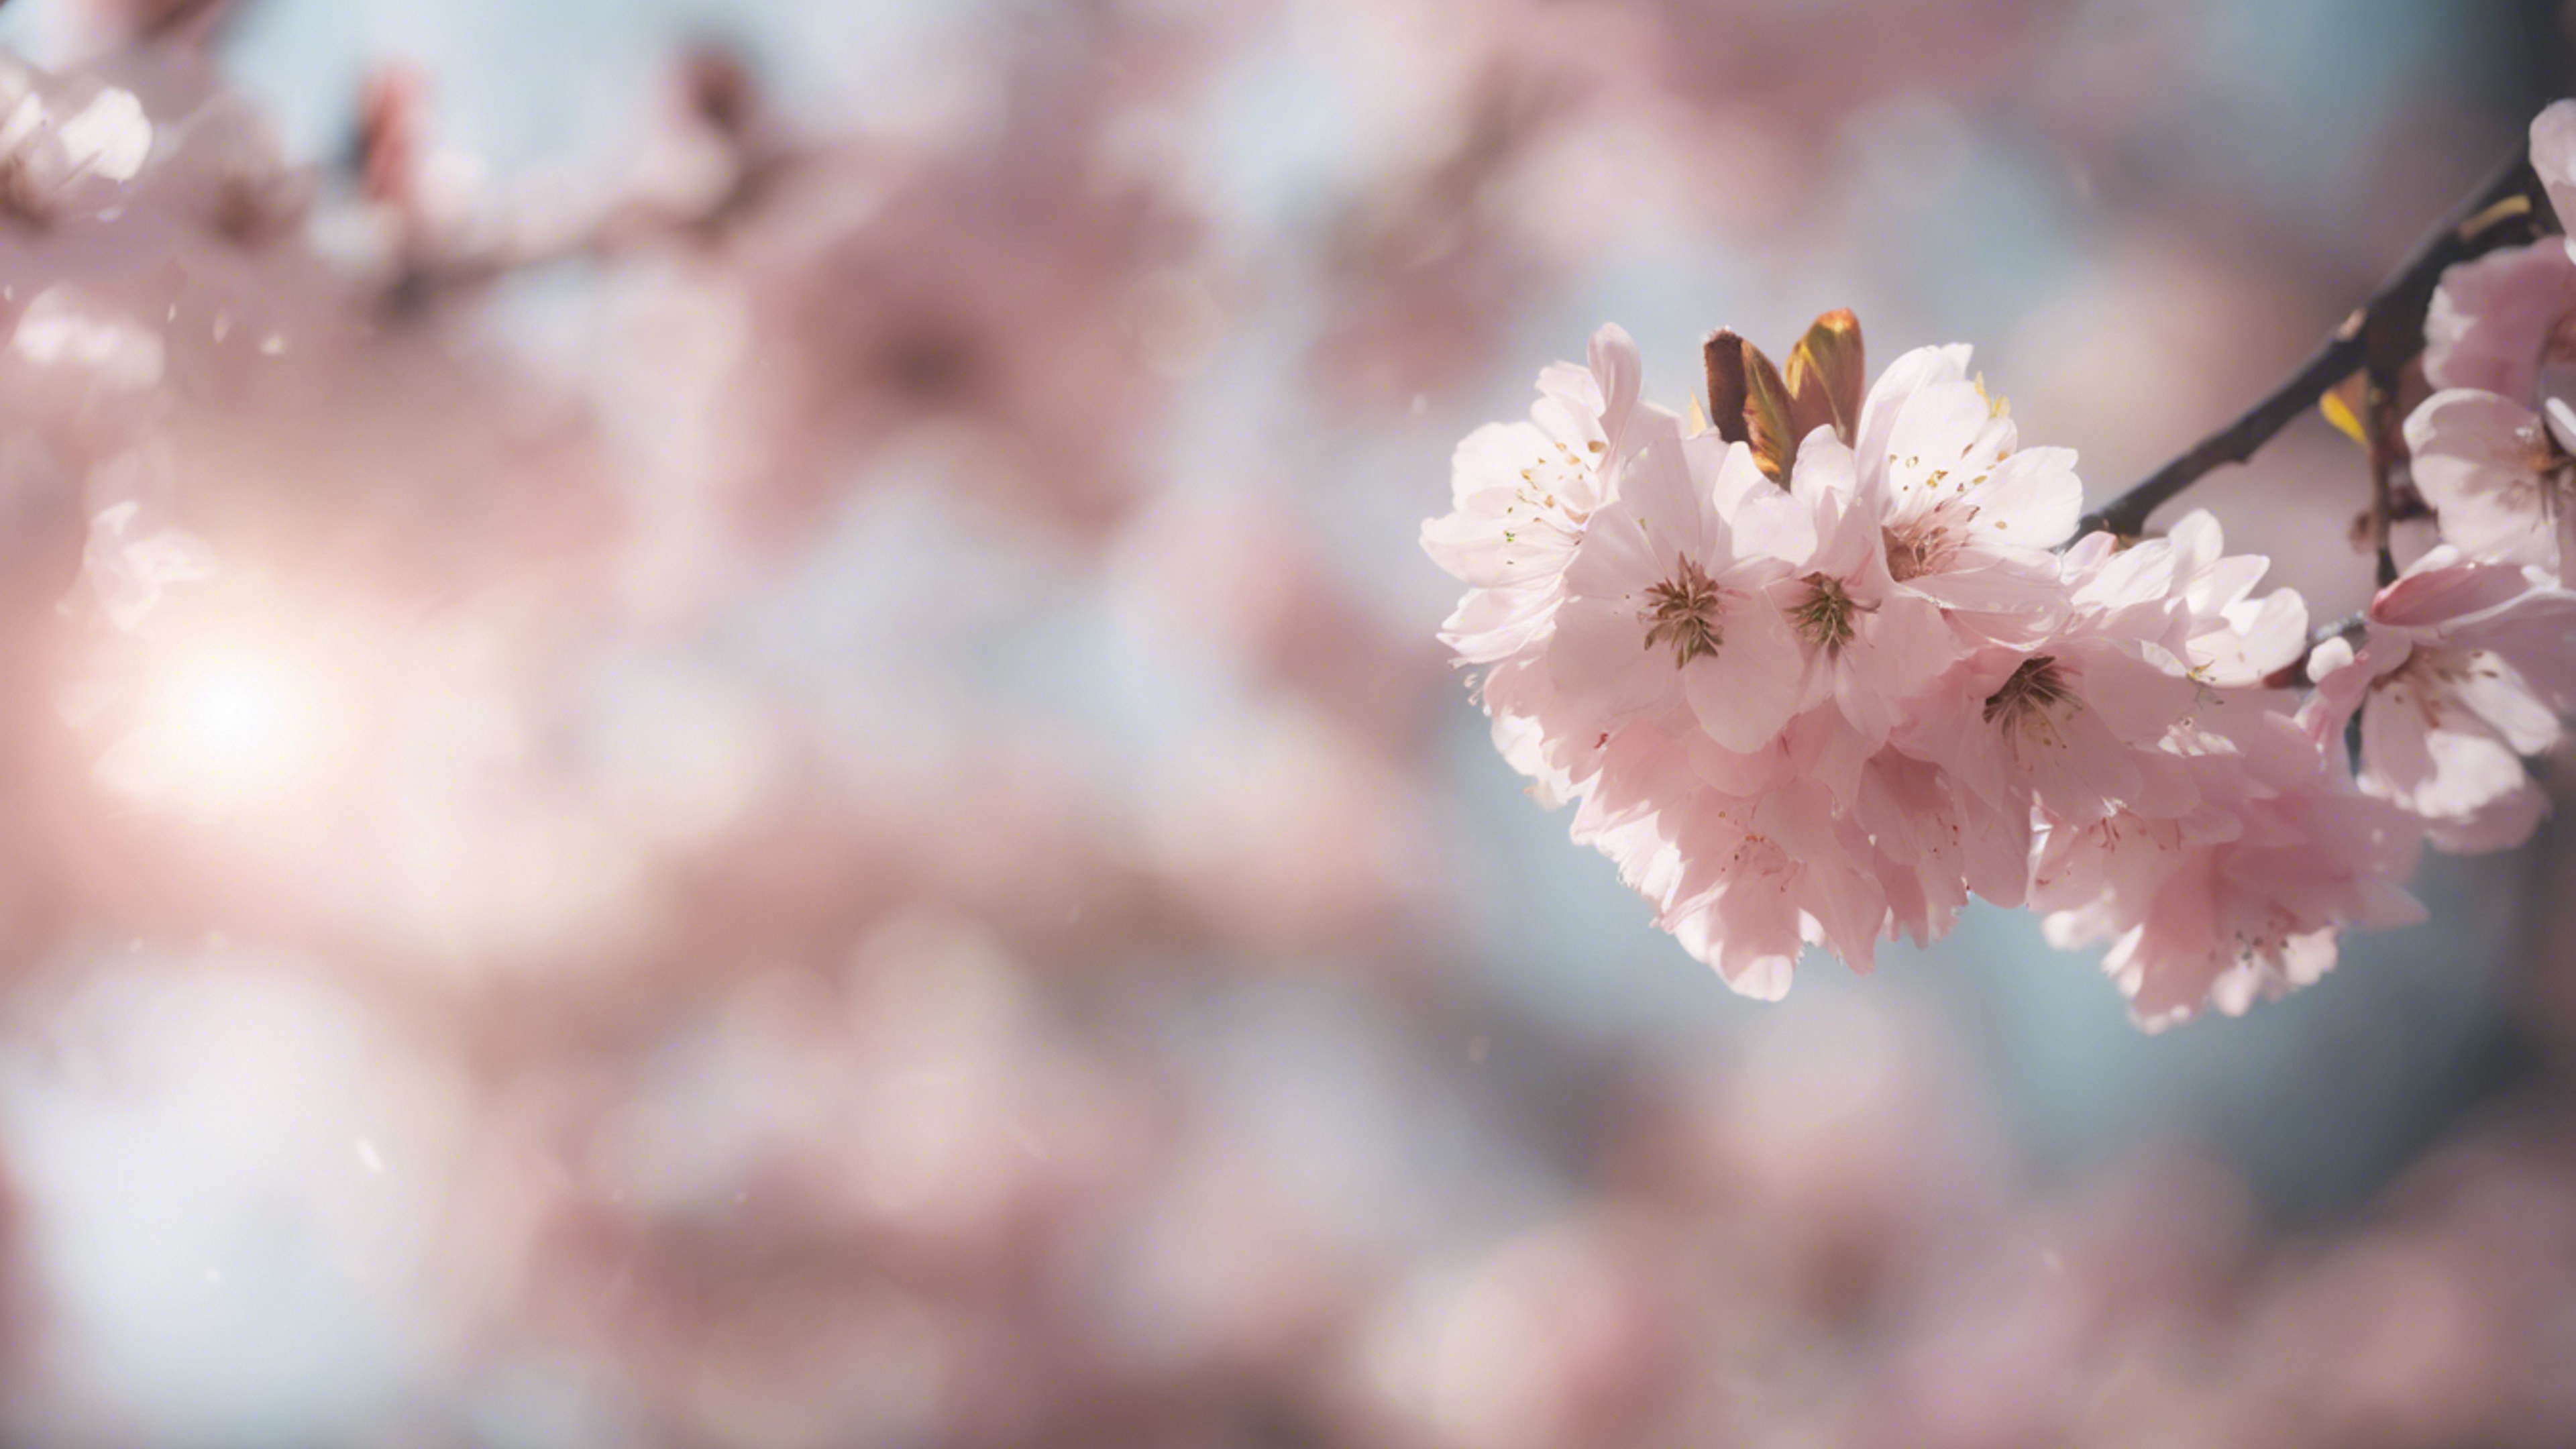 An ethereal dreamscape featuring cherry blossoms wafting in the soft spring breeze. Tapet[9de2e4f1deeb467ebab6]